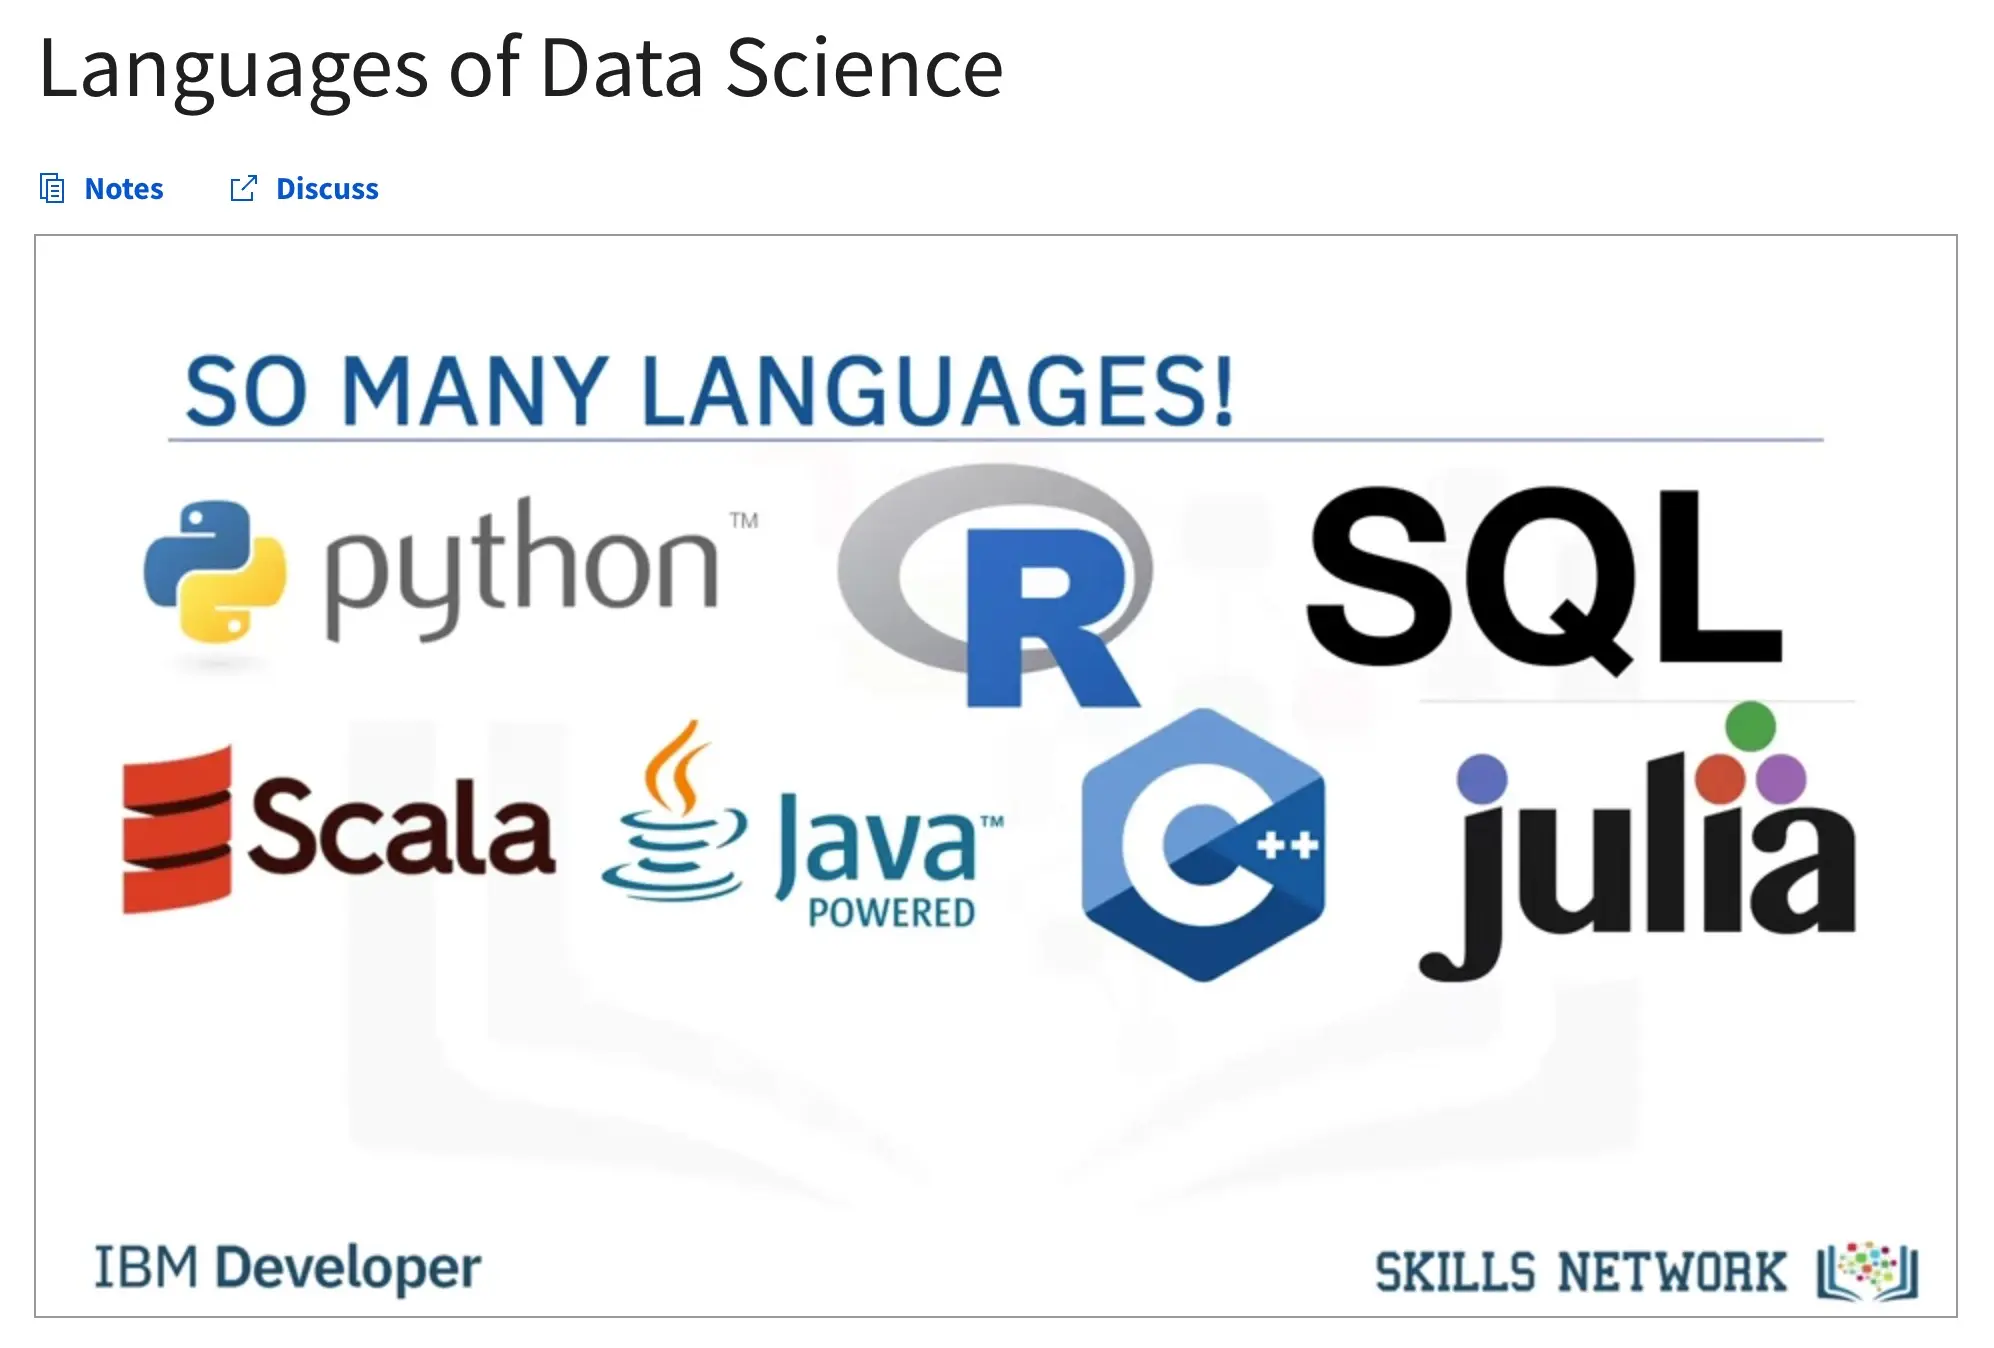 Tools for Data Science Course